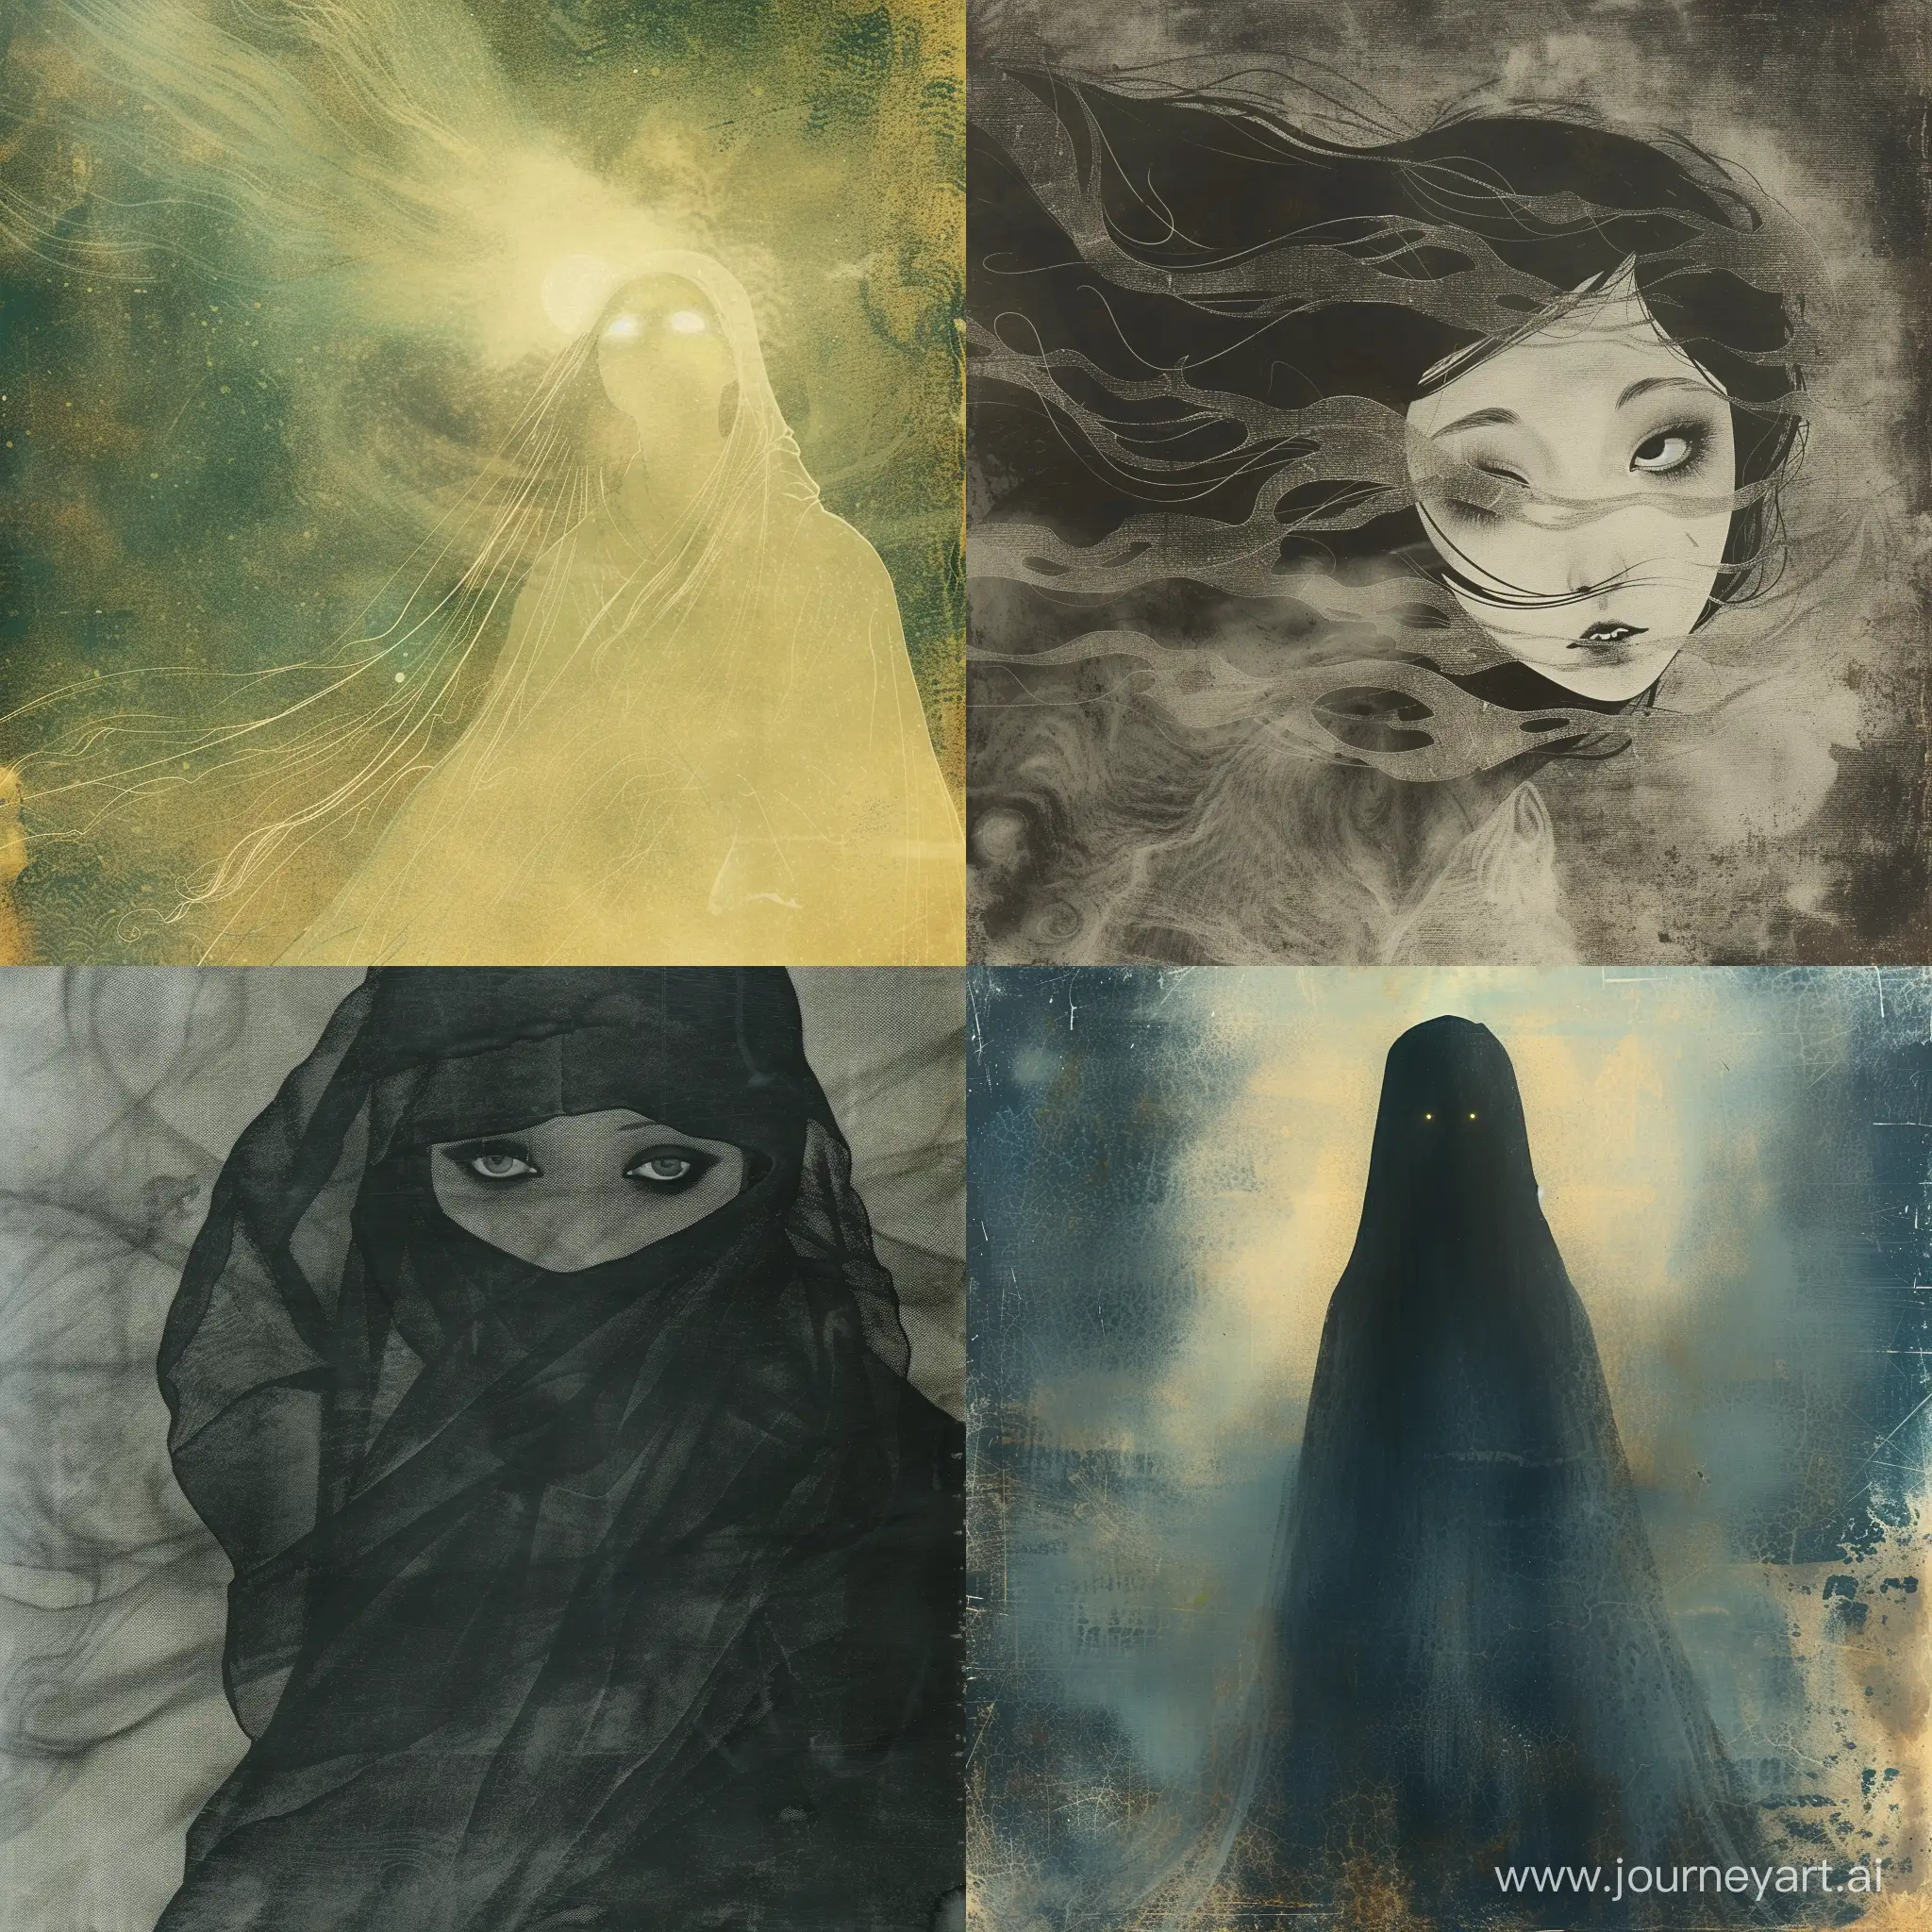 A spectral figure shrouded in ethereal mist, her form constantly shifting and flickering in and out of existence. Her eyes gleam with a malevolent light, and her voice echoes like a mournful wail on the wind, in a cursed land where the veil between the worlds is thin, Ukiyo-E painting style, wood block printing, vintage, 